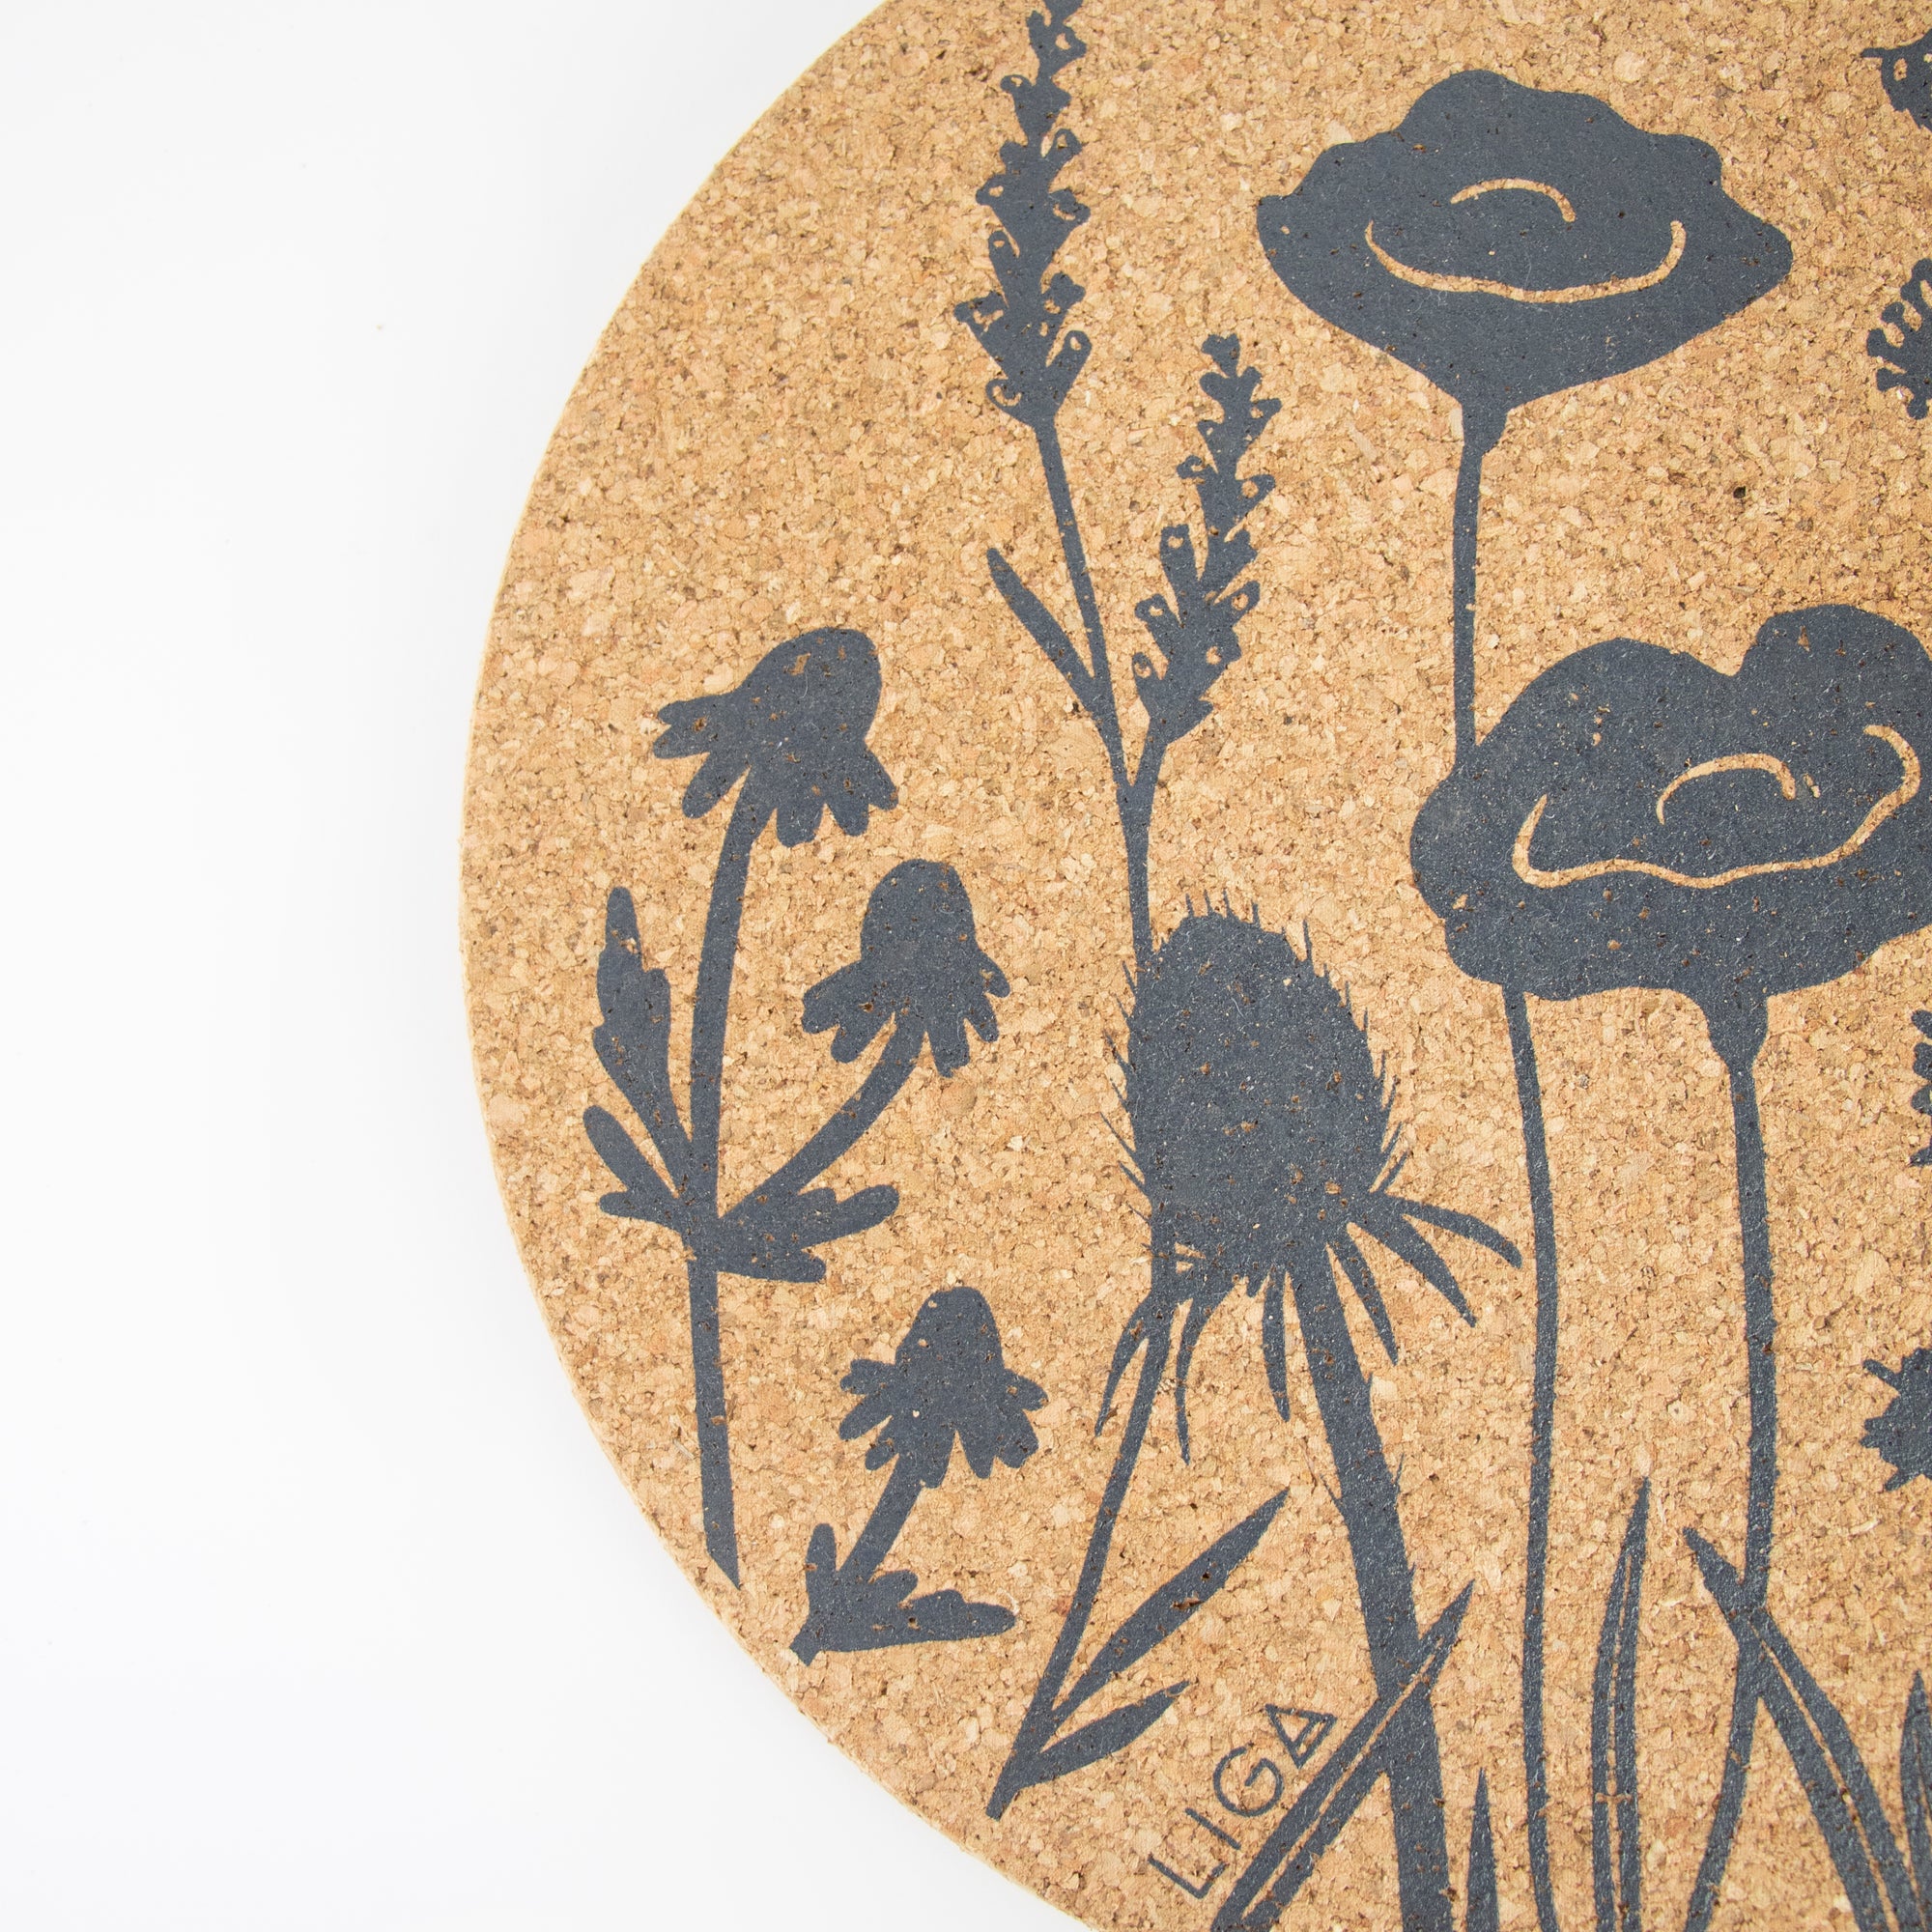 eco cork placemats and coasters. Wildflower design